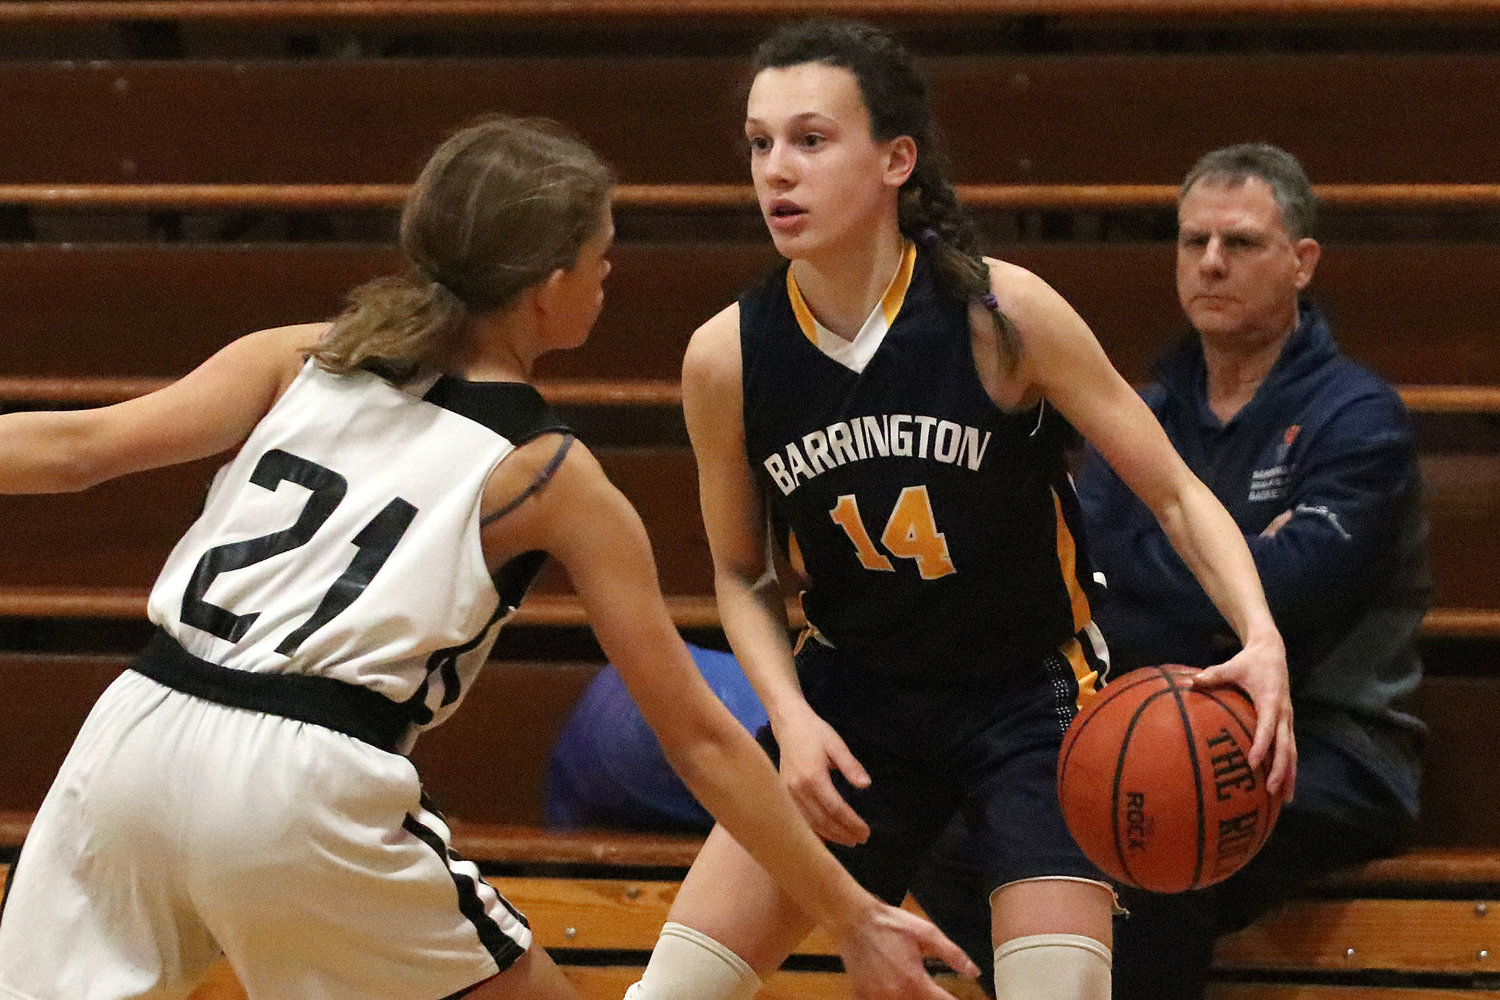 Barrington's Maddie Gill looks for an opening in the Kickemuit Middle School defense during a game last week. Maddie and the BMS girls team finished the regular season undefeated.